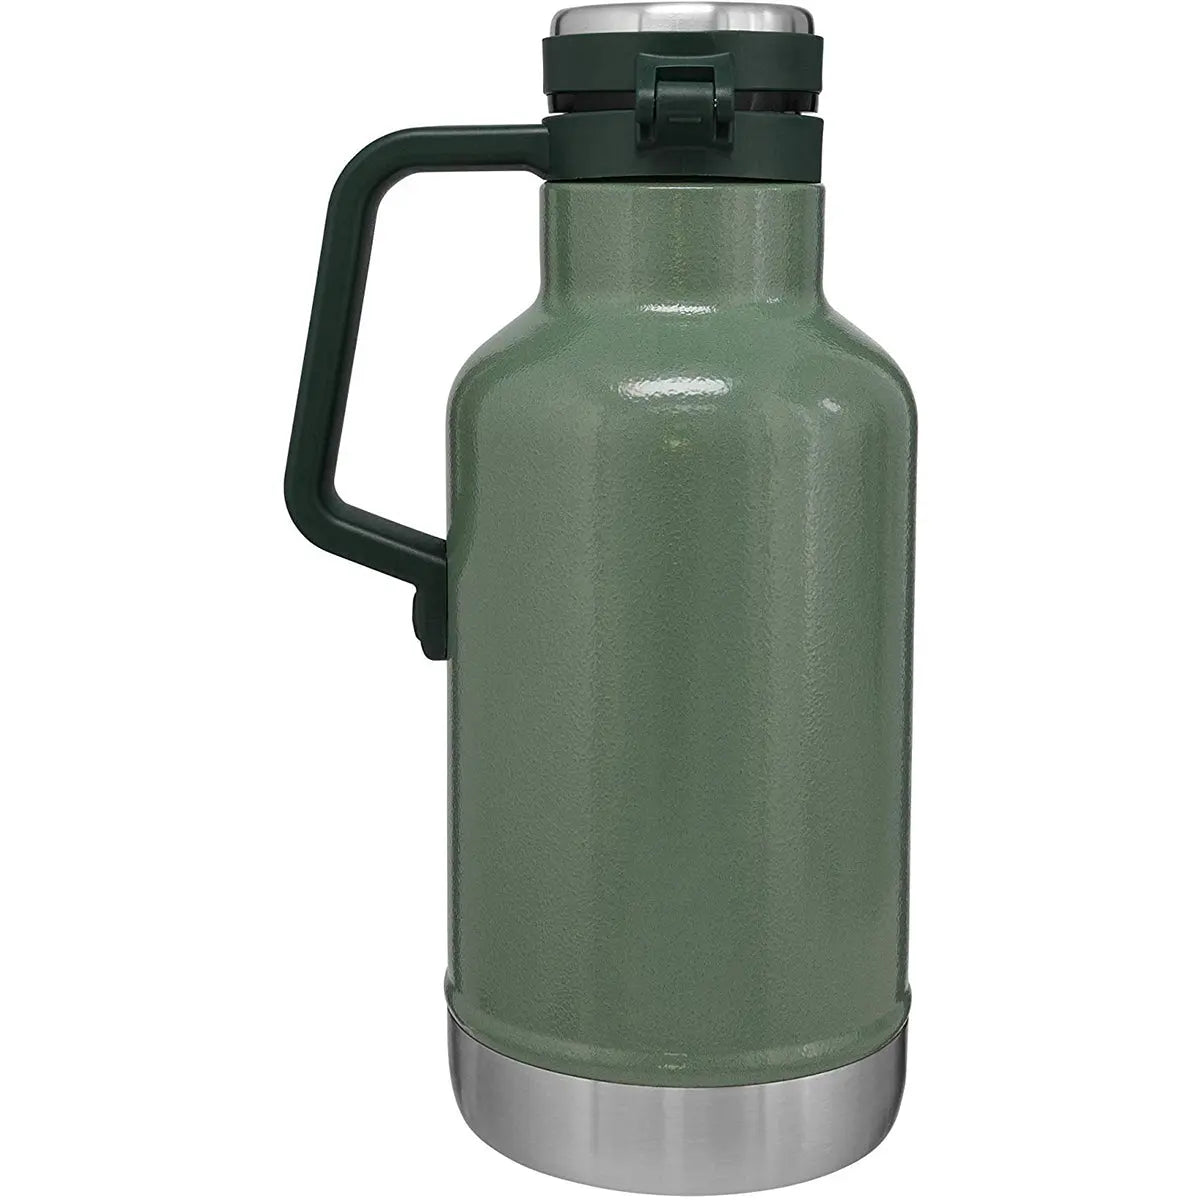 Stanley Classic 2 qt. Vacuum Insulated Stainless Steel Easy-Pour Growler Stanley